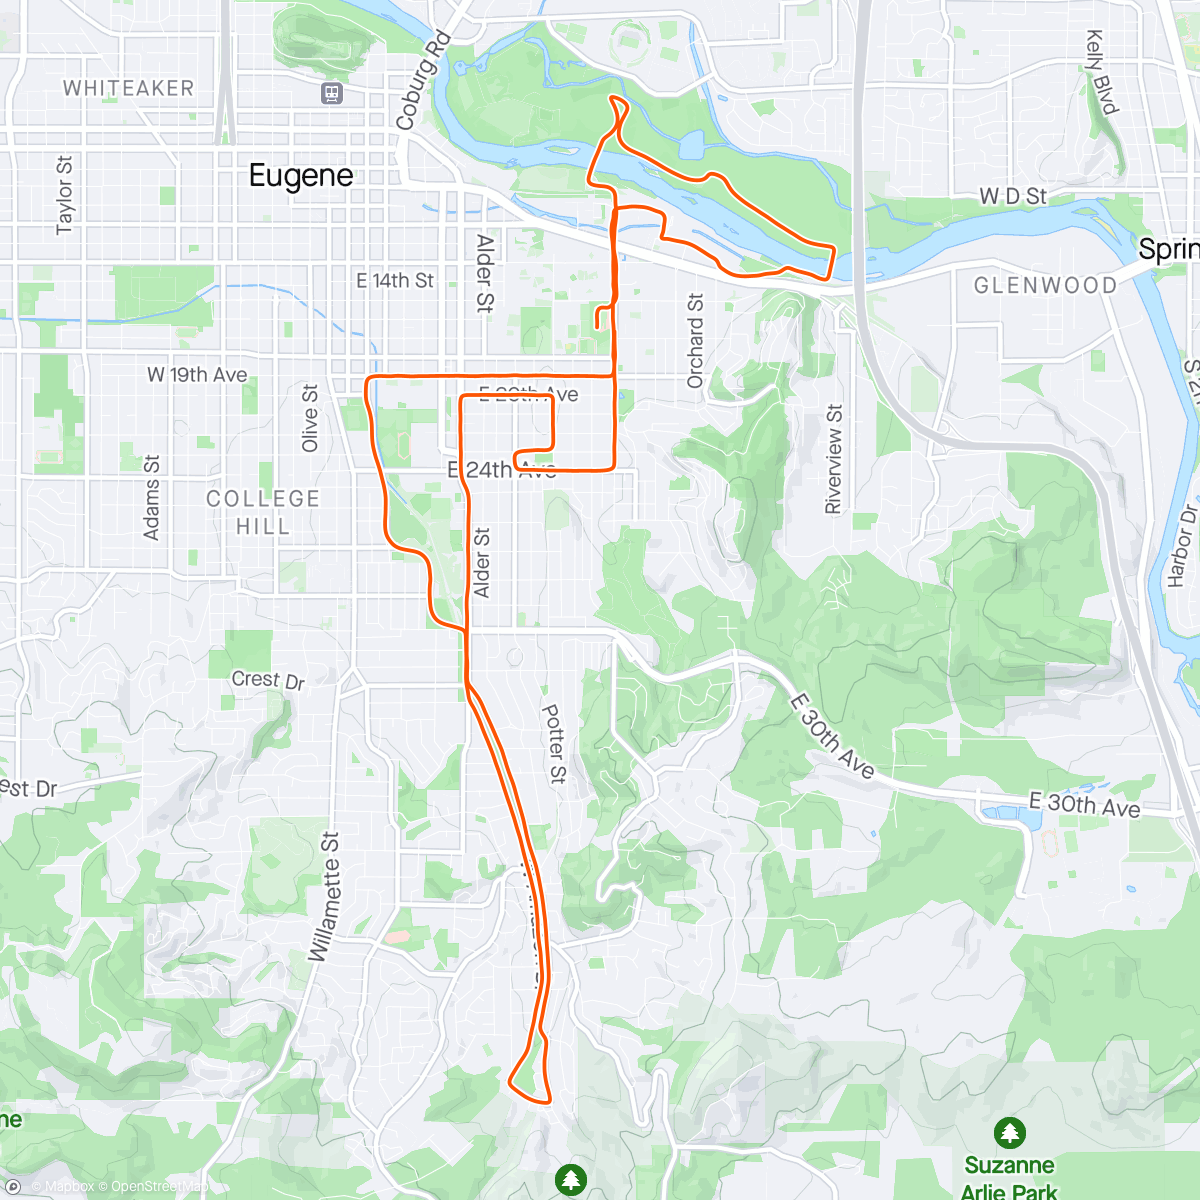 Carte de l'activité Eugene Half Marathon - Grateful I can still (mostly) run a half marathon without doing run specific training for it but realizing how much more fun races are when you’re race fit. Next time.